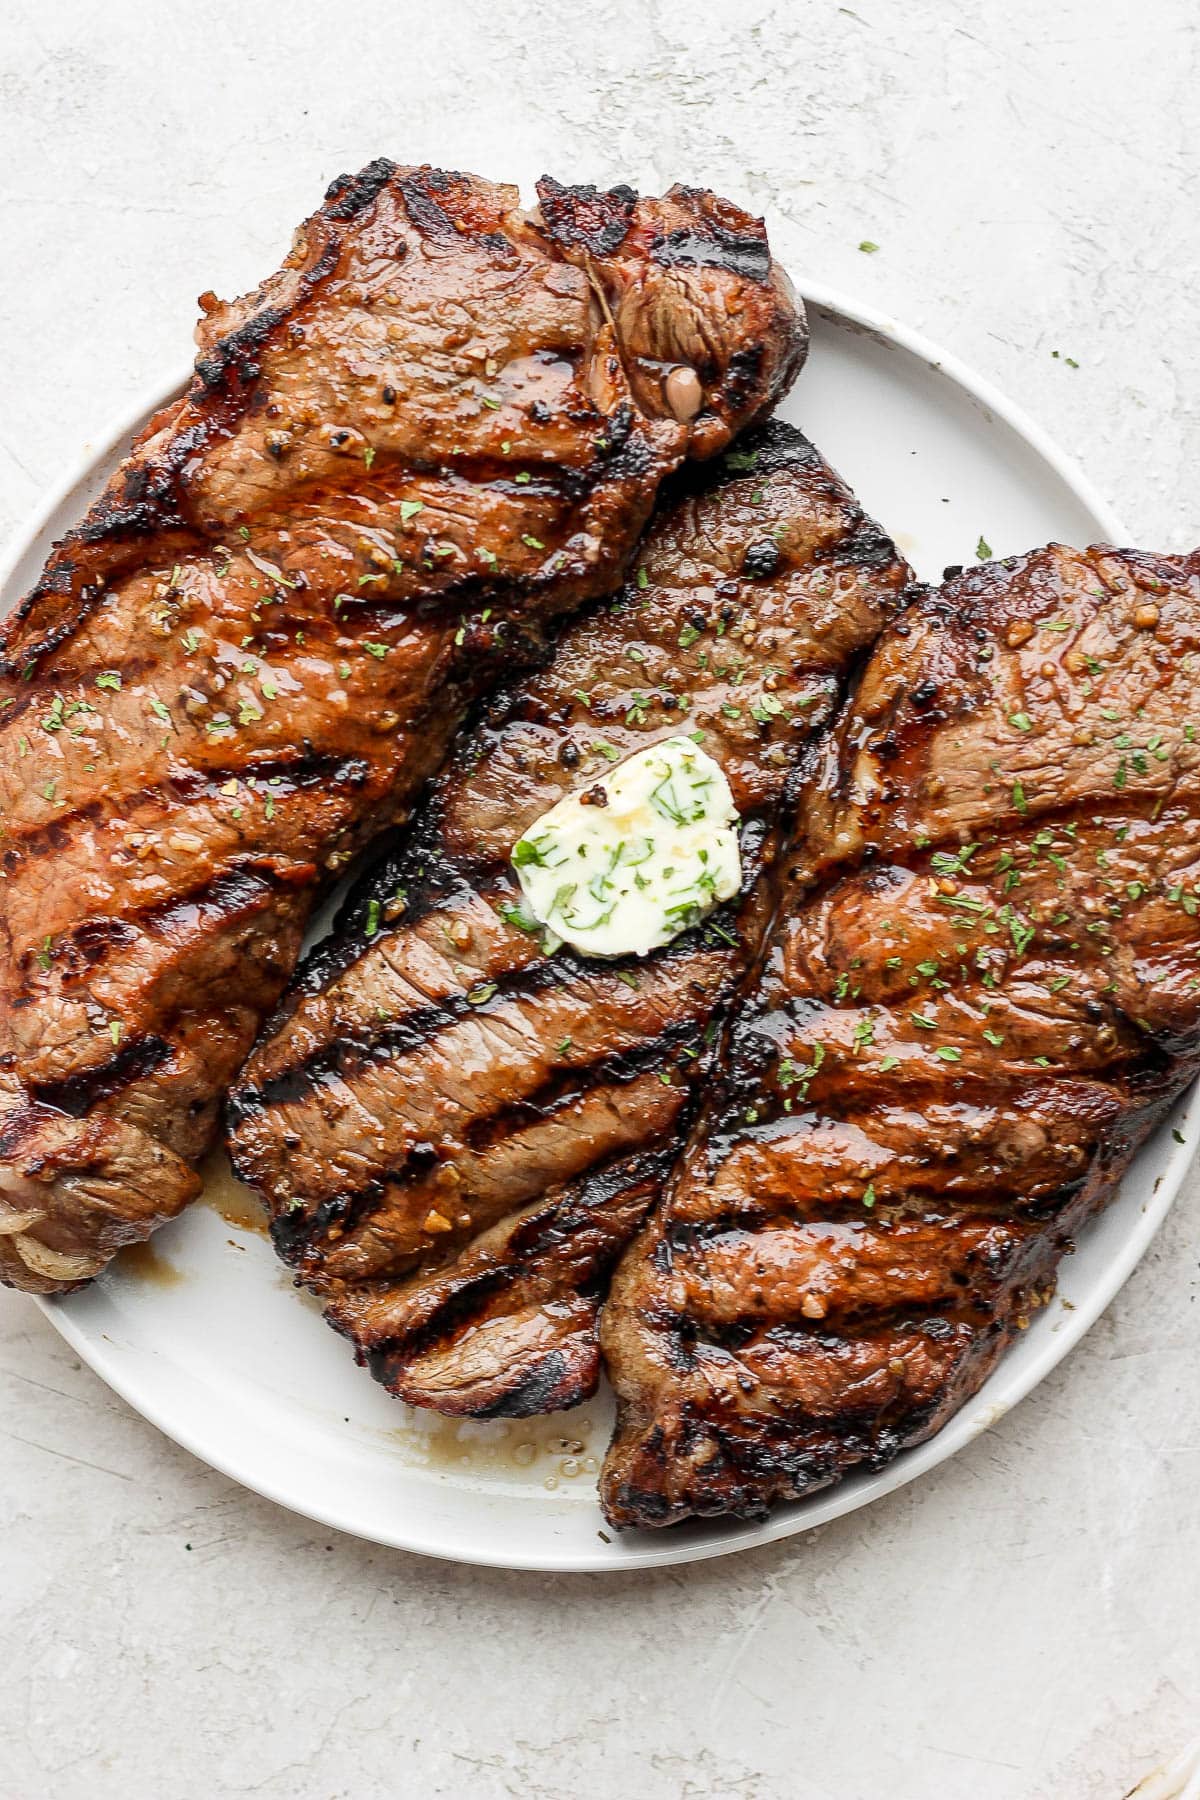 Three steaks on a plate, the middle steak has herbed butter on top. 